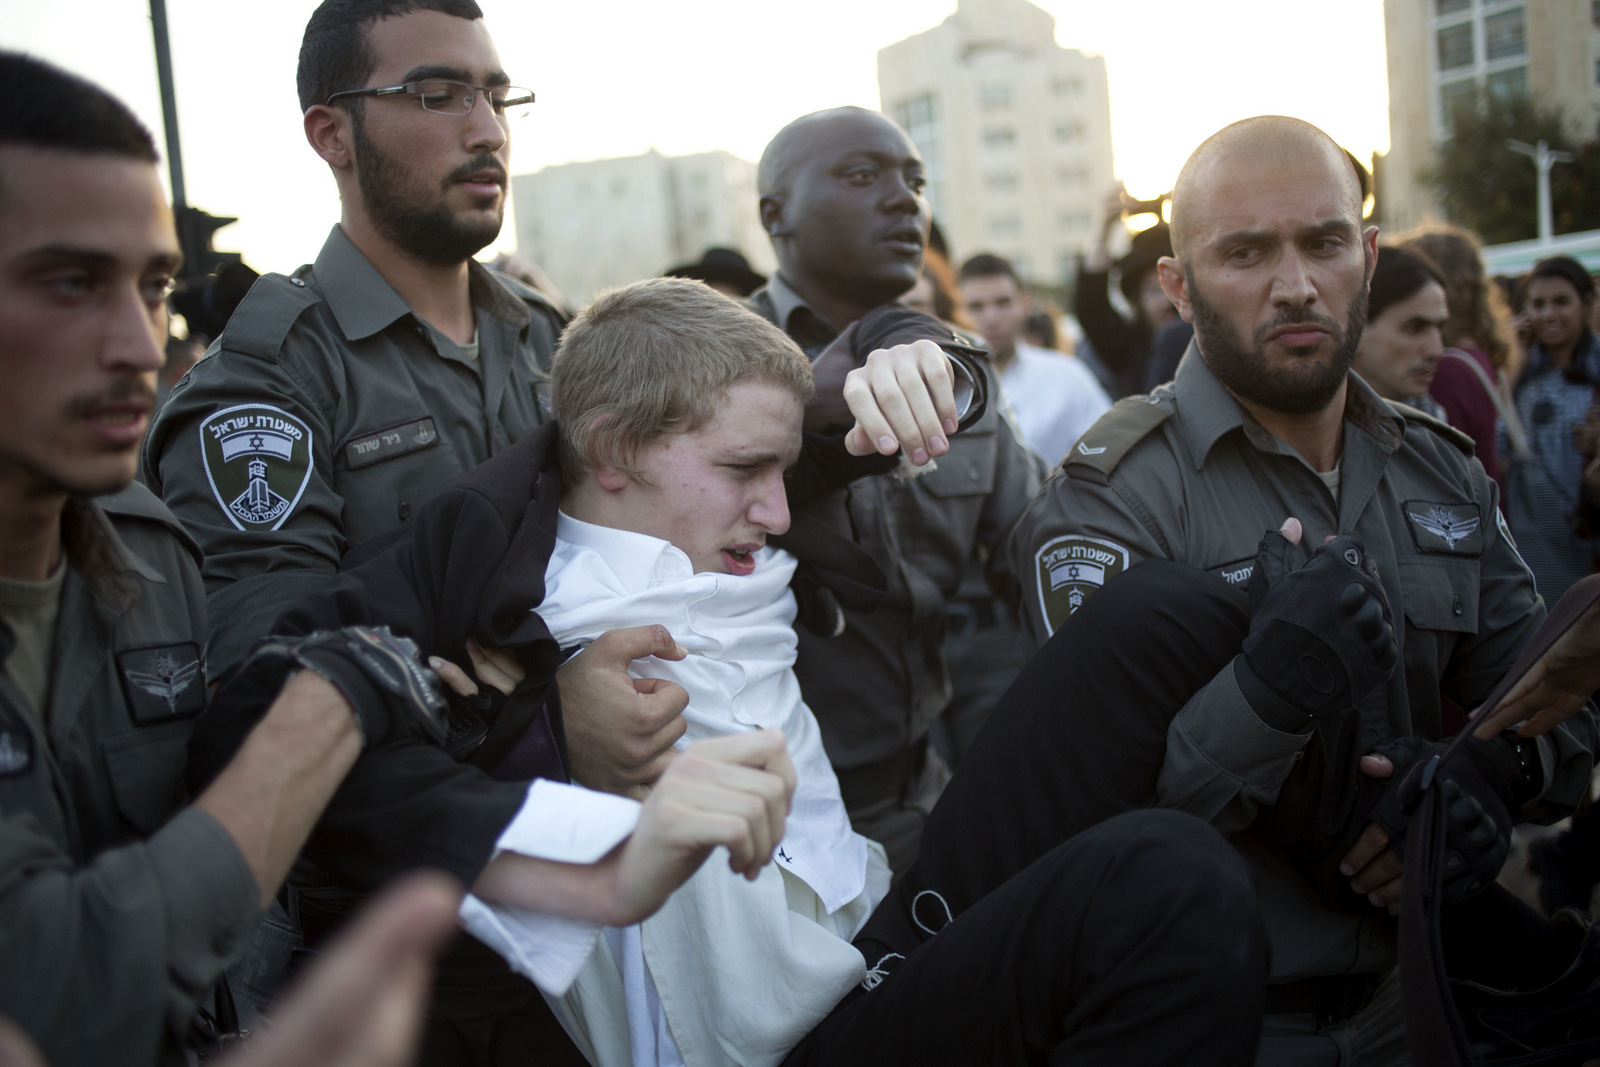 Israeli Police officers arrest an ultra-Orthodox Jew during a protest against Israeli army conscription, in Jerusalem, Oct. 19, 2017. (AP/Ariel Schalit)